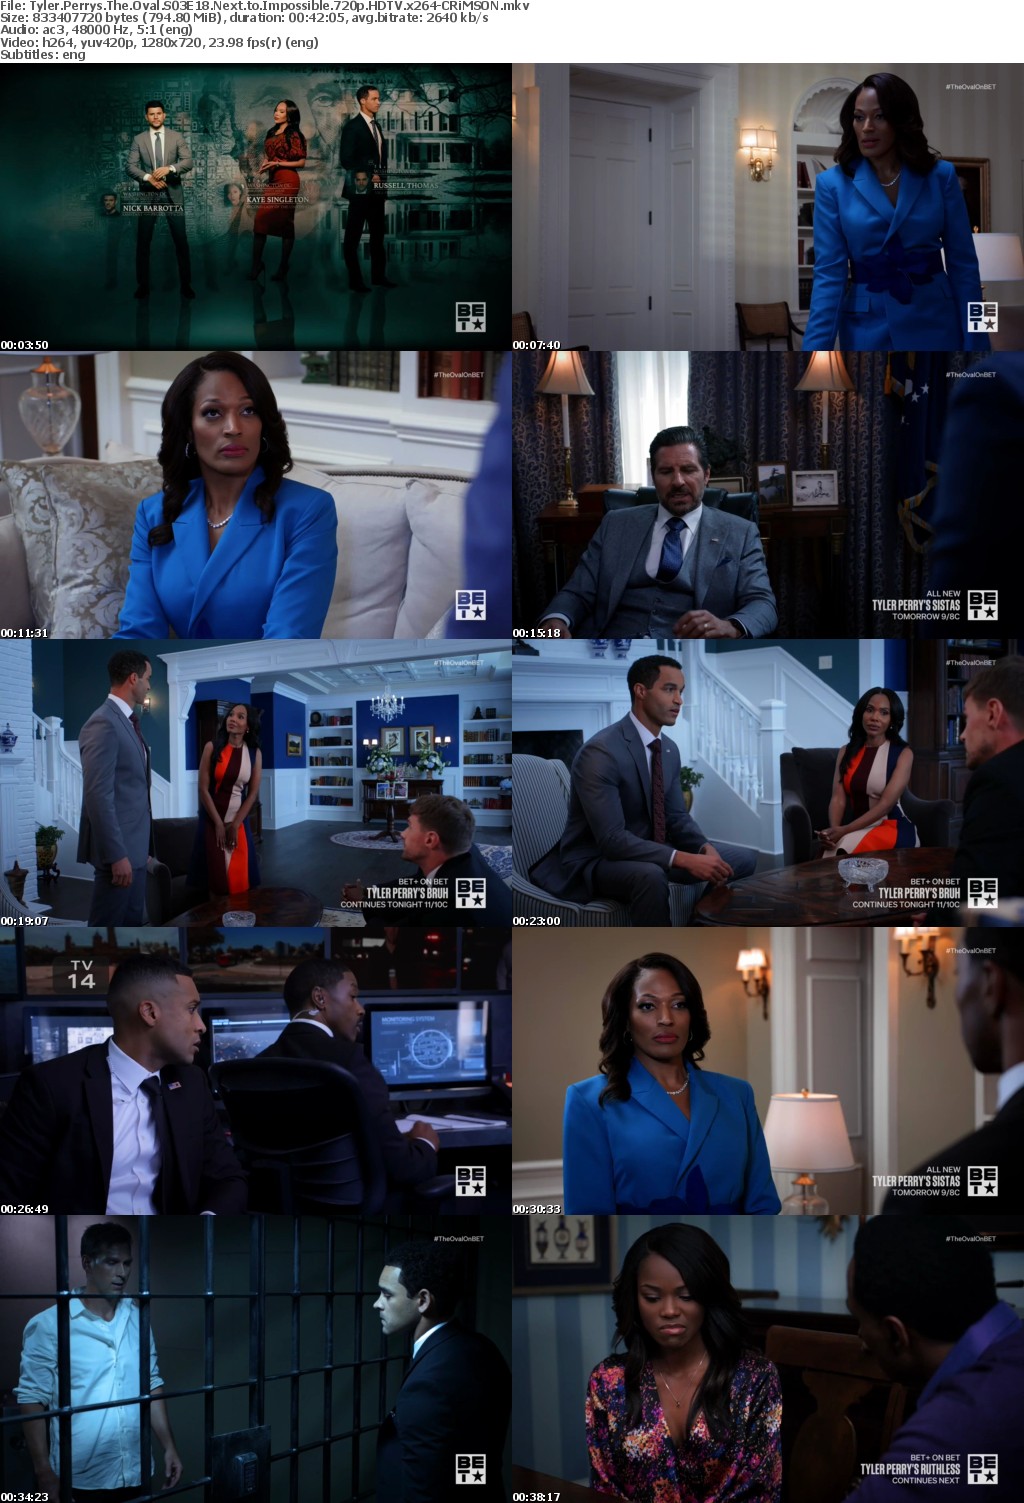 Tyler Perrys The Oval S03E18 Next to Impossible 720p HDTV x264-CRiMSON